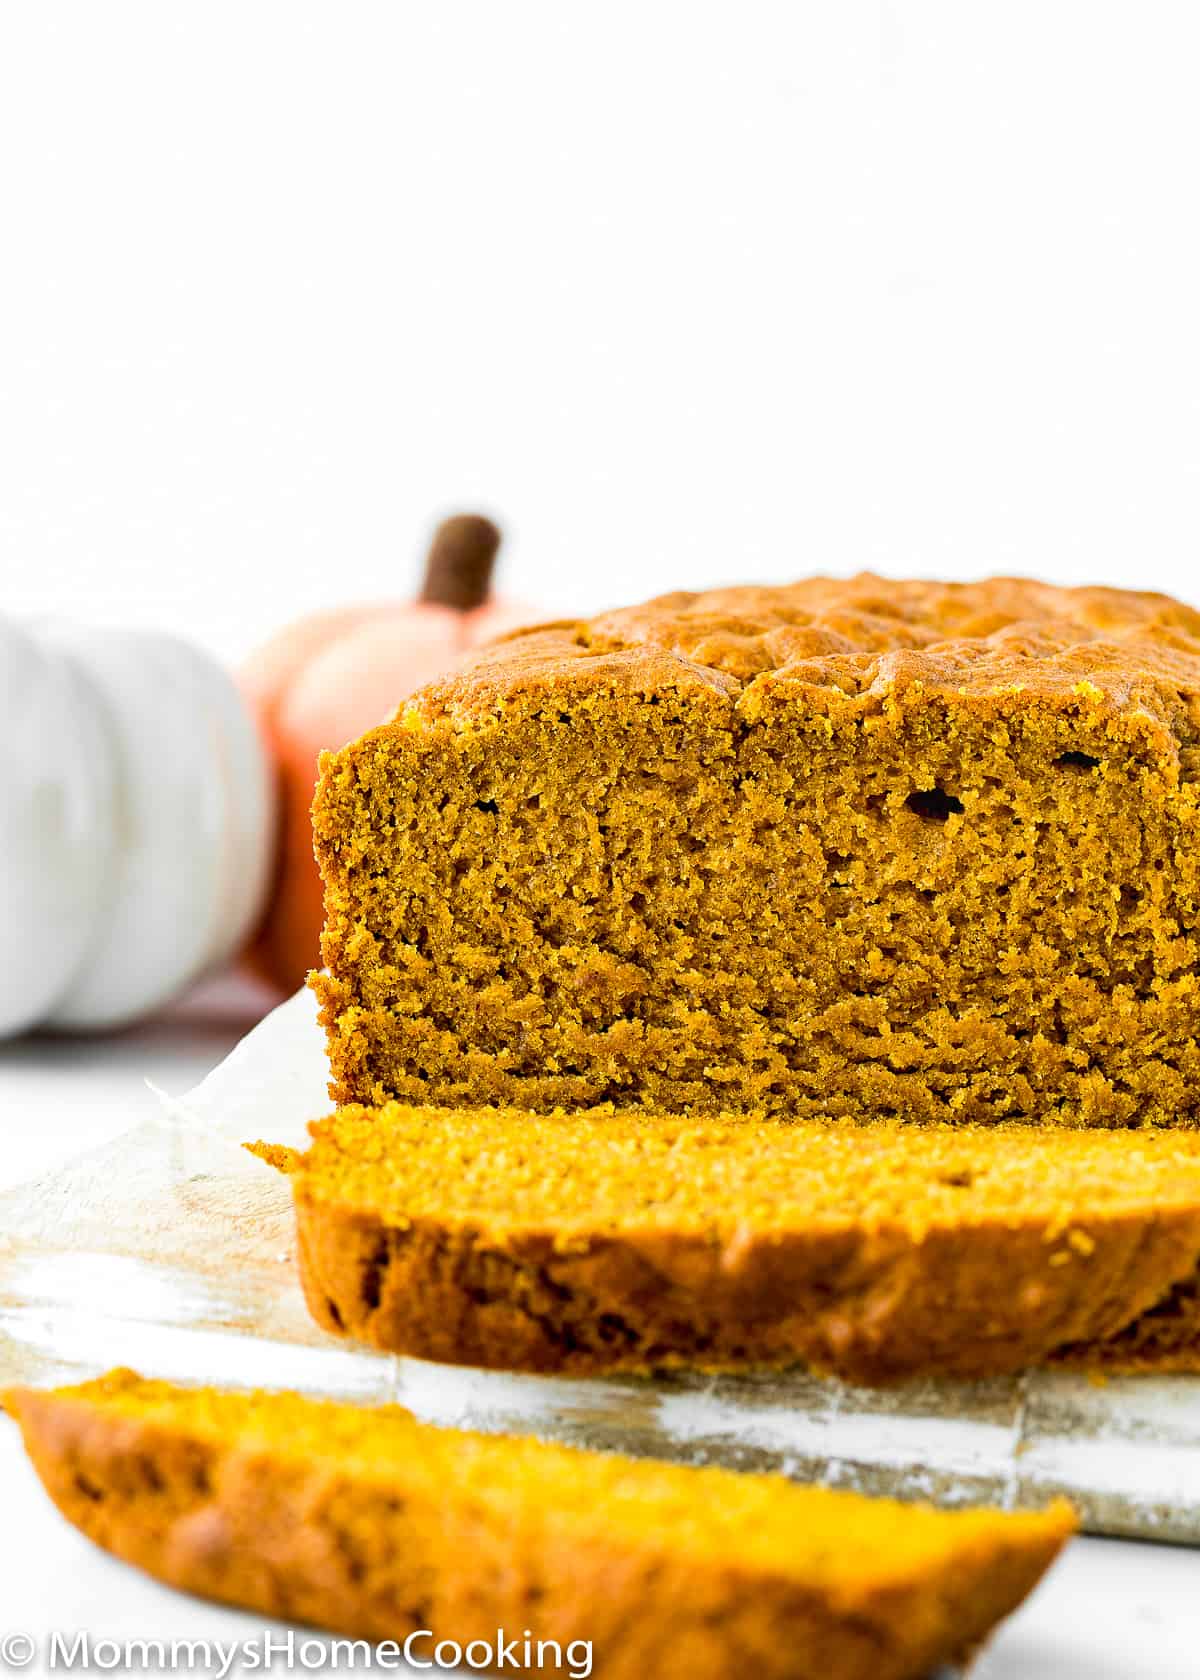 Eggless Pumpkin Bread sliced showing dense and perfect texture.